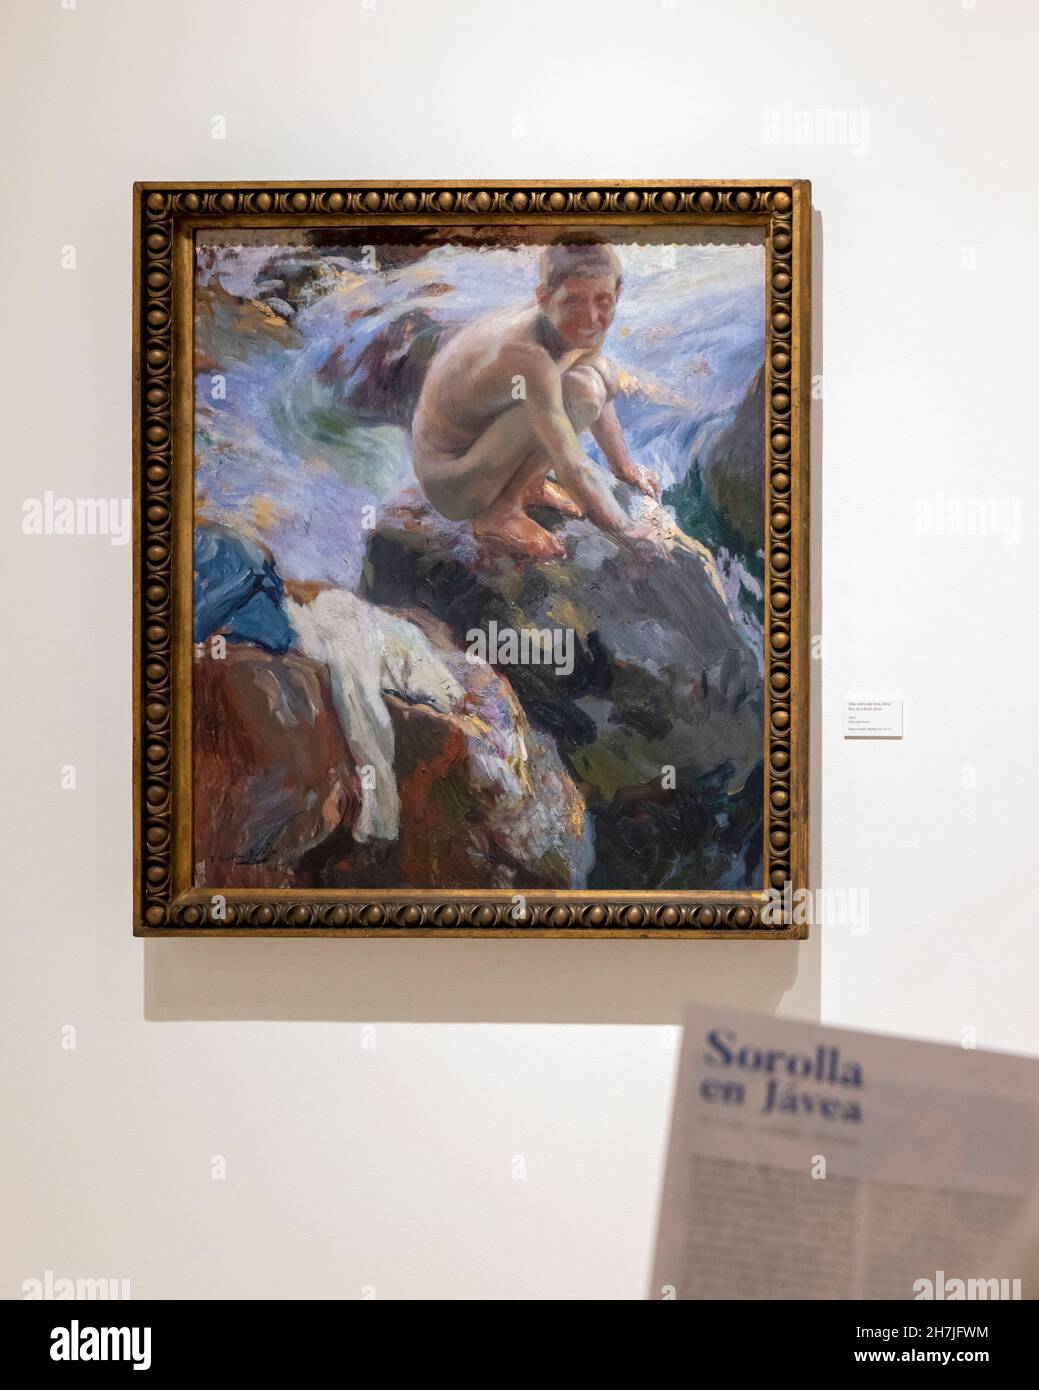 stock and Alamy painter sorolla - joaquin images Museum photography hi-res